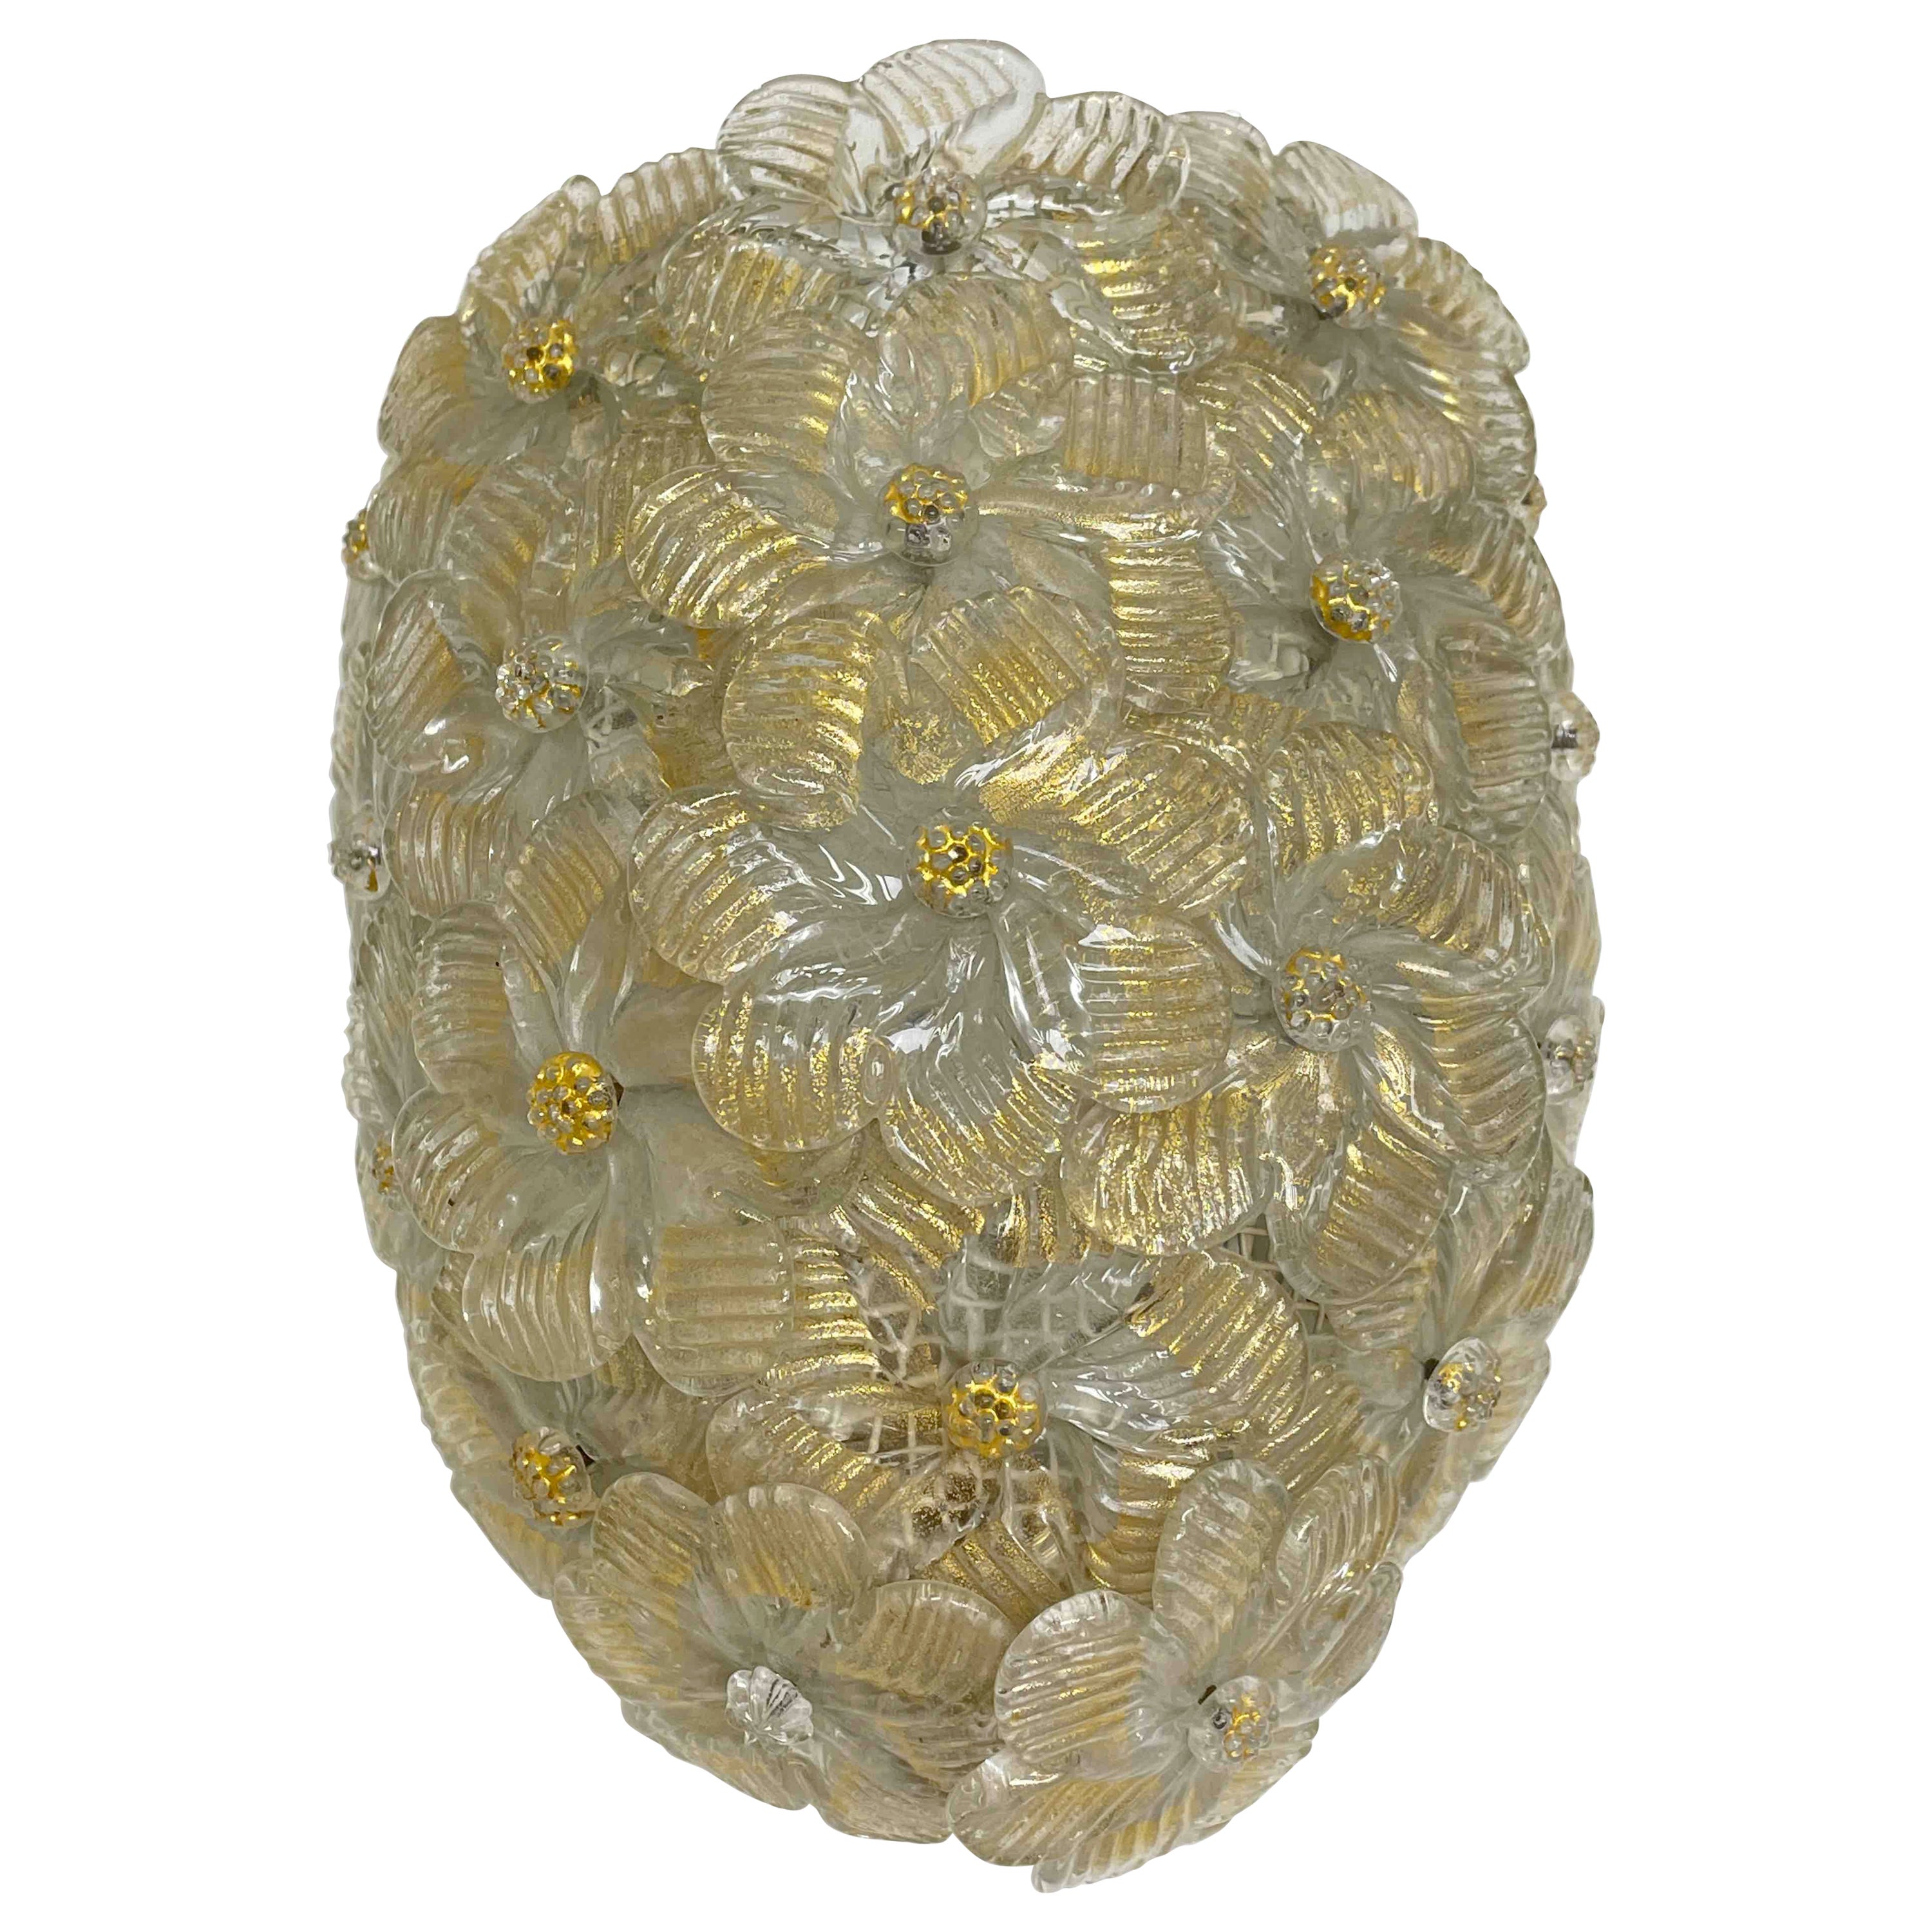 Barovier Toso Sconce Murano Glass Gold and Ice Flowers Basket, 1950s For Sale